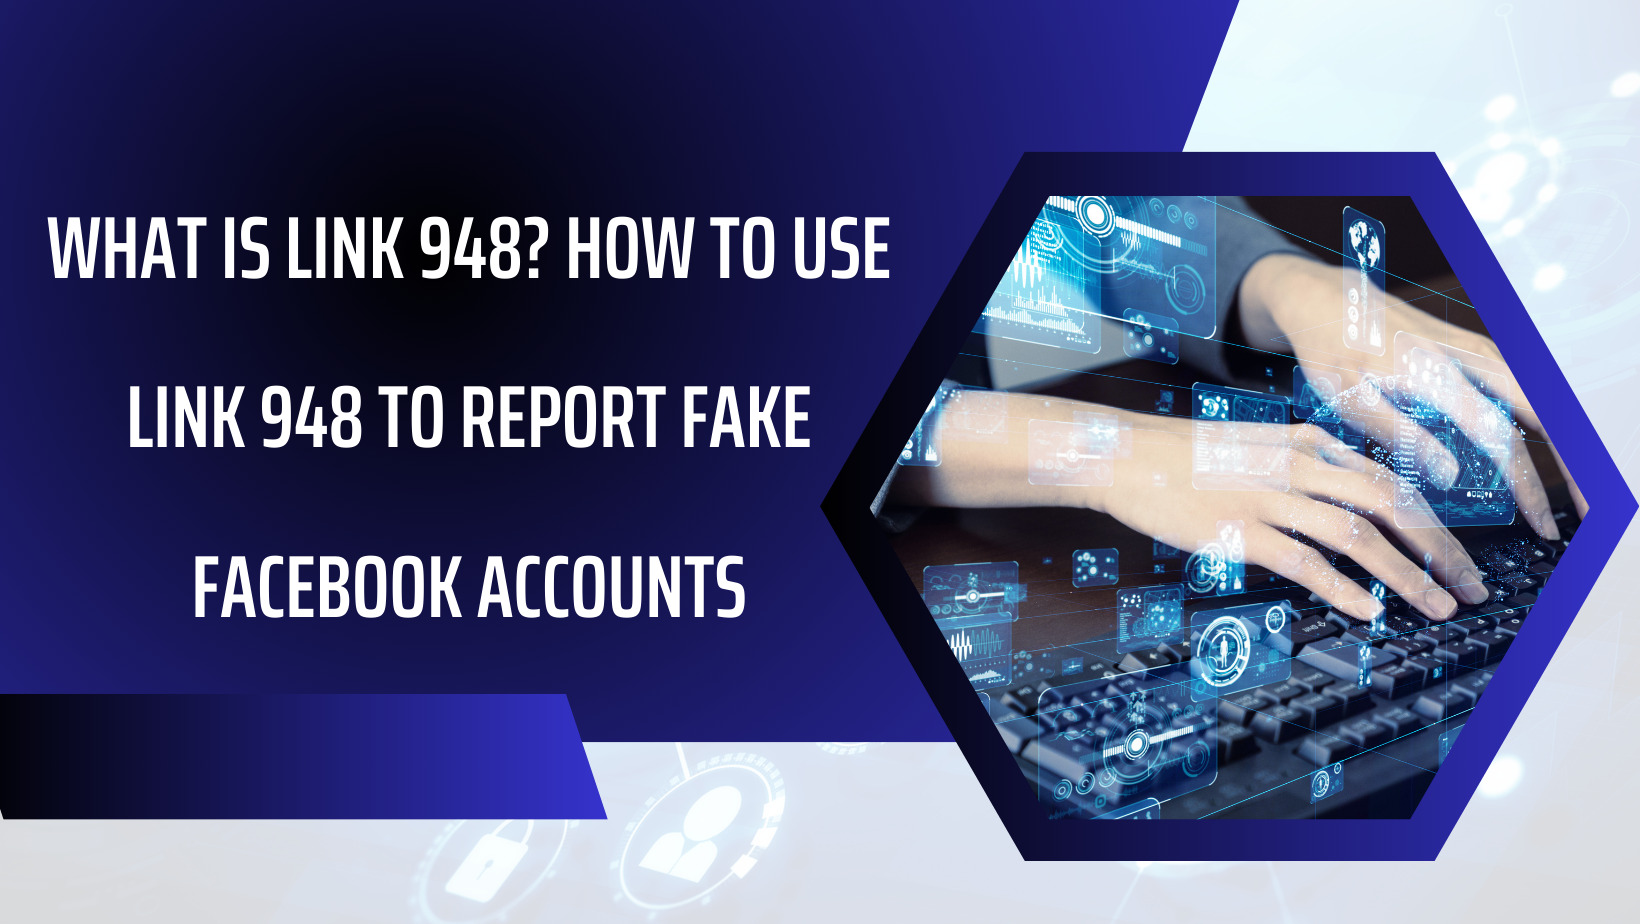 What is Link 948? How to use link 948 to report fake Facebook accounts